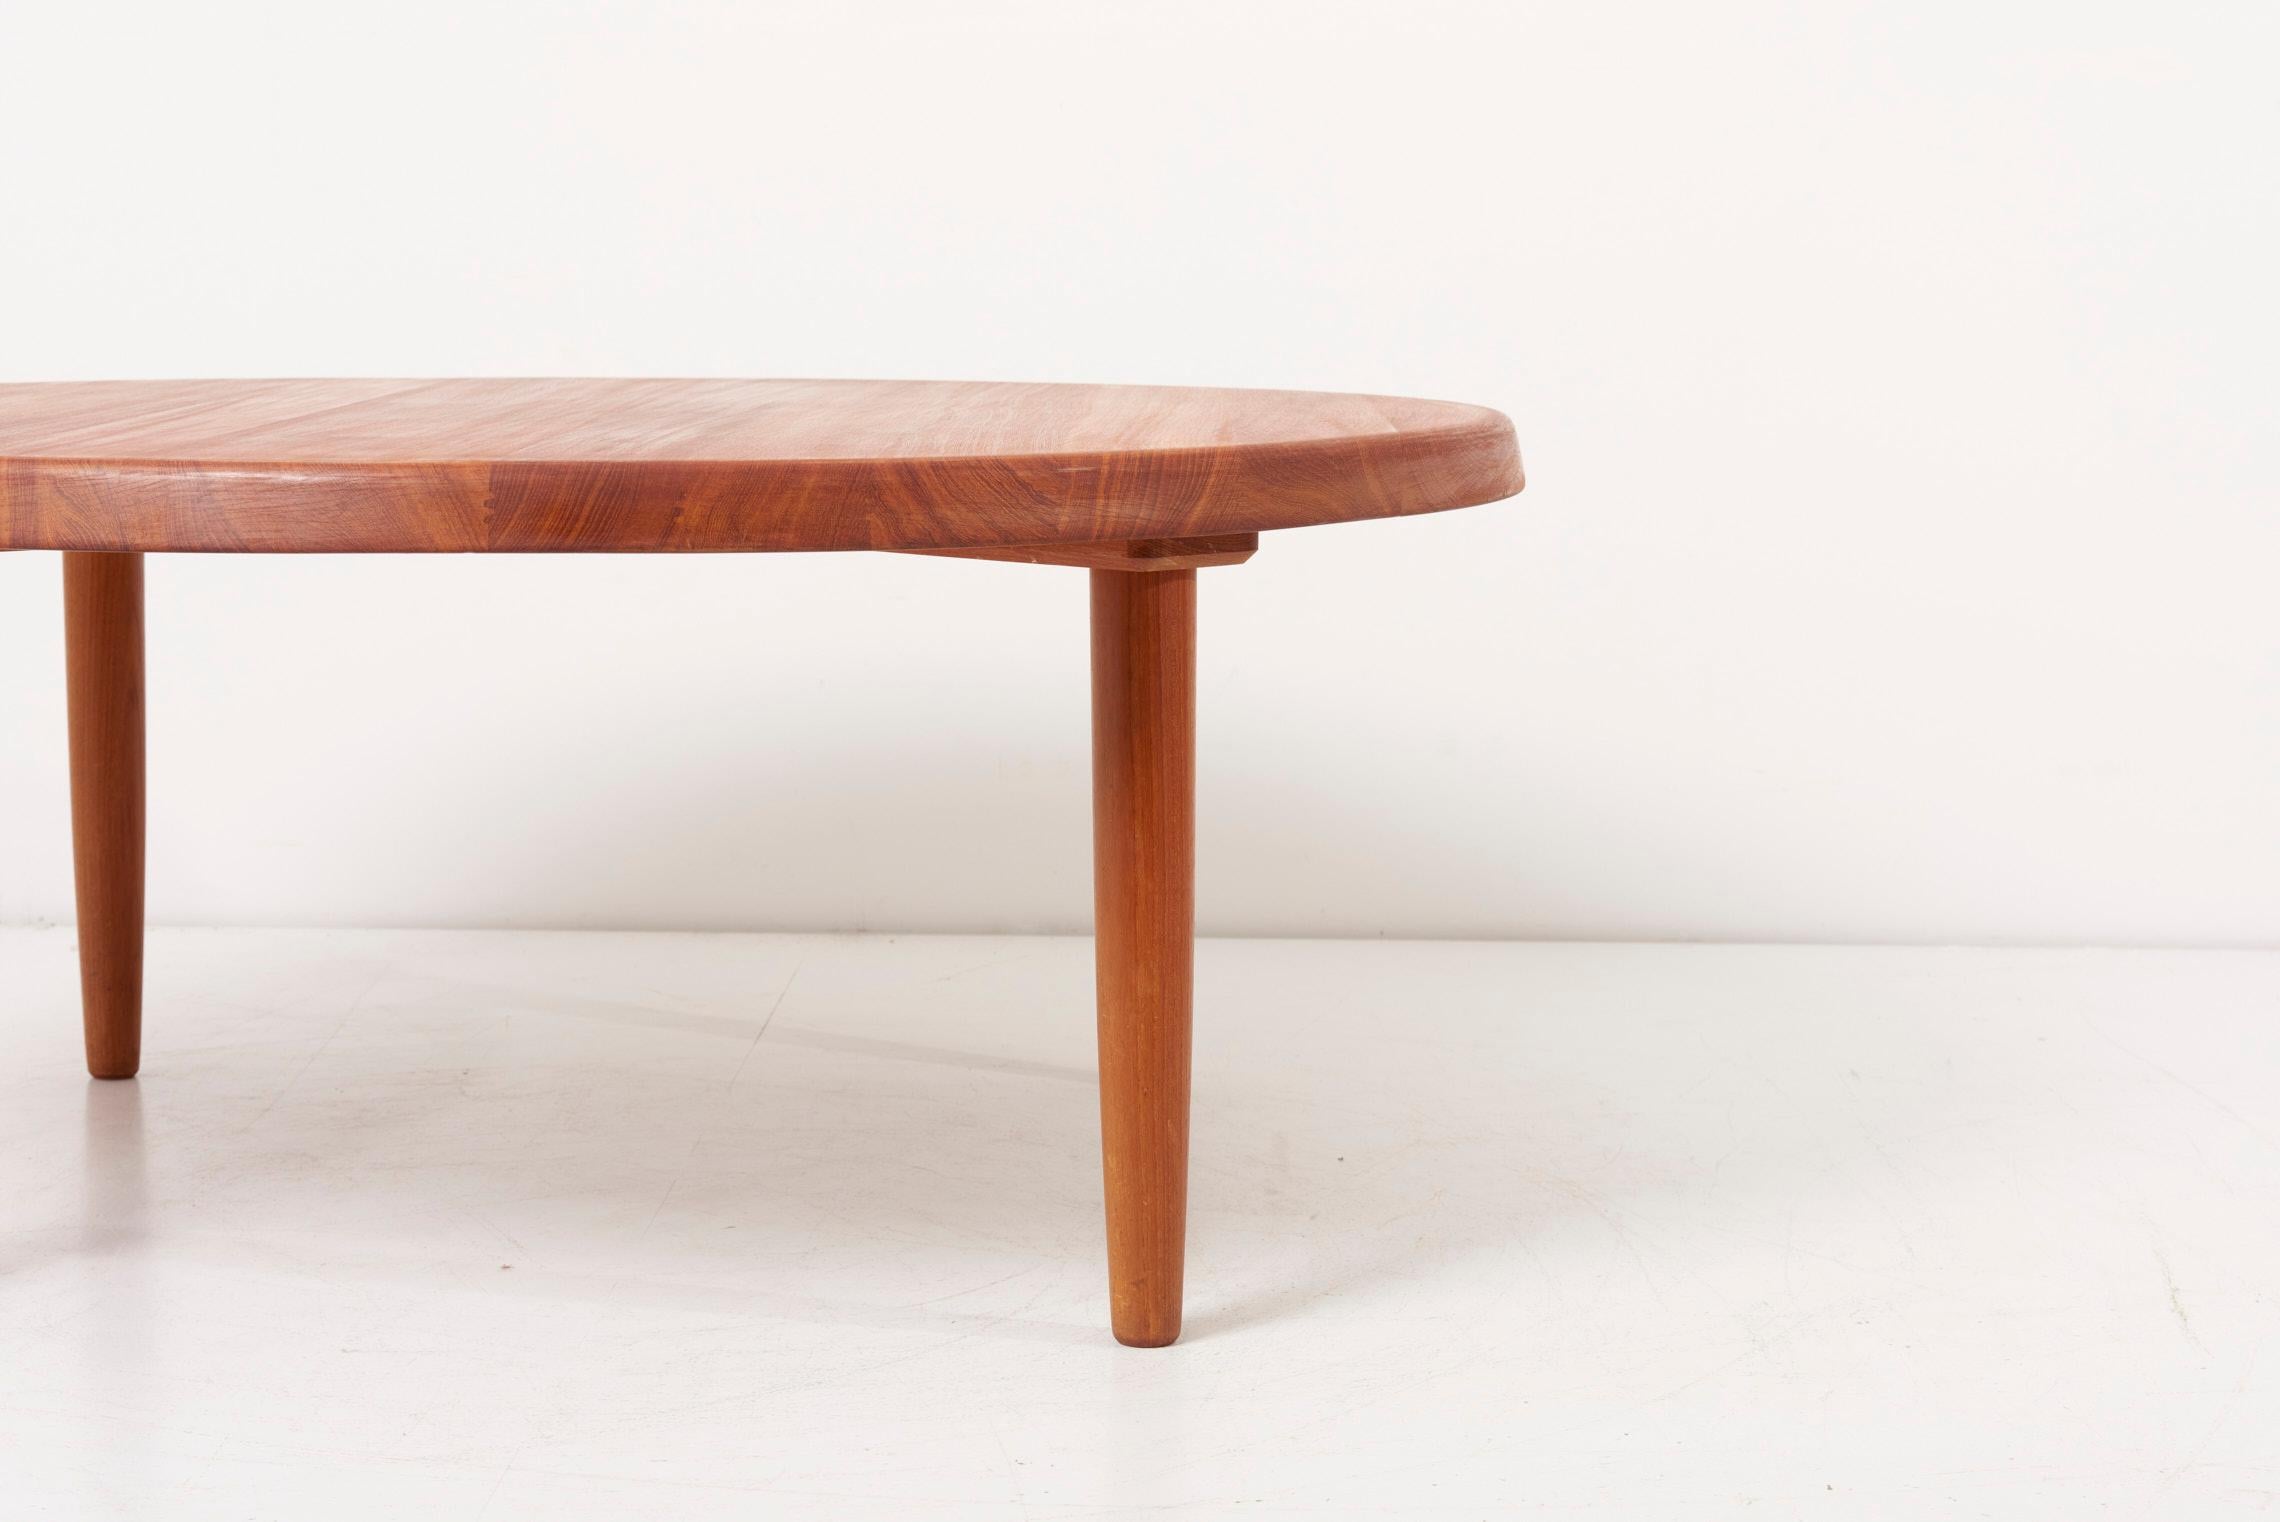 Large Solid Teak Coffee Table, 1960s Denmark For Sale 1